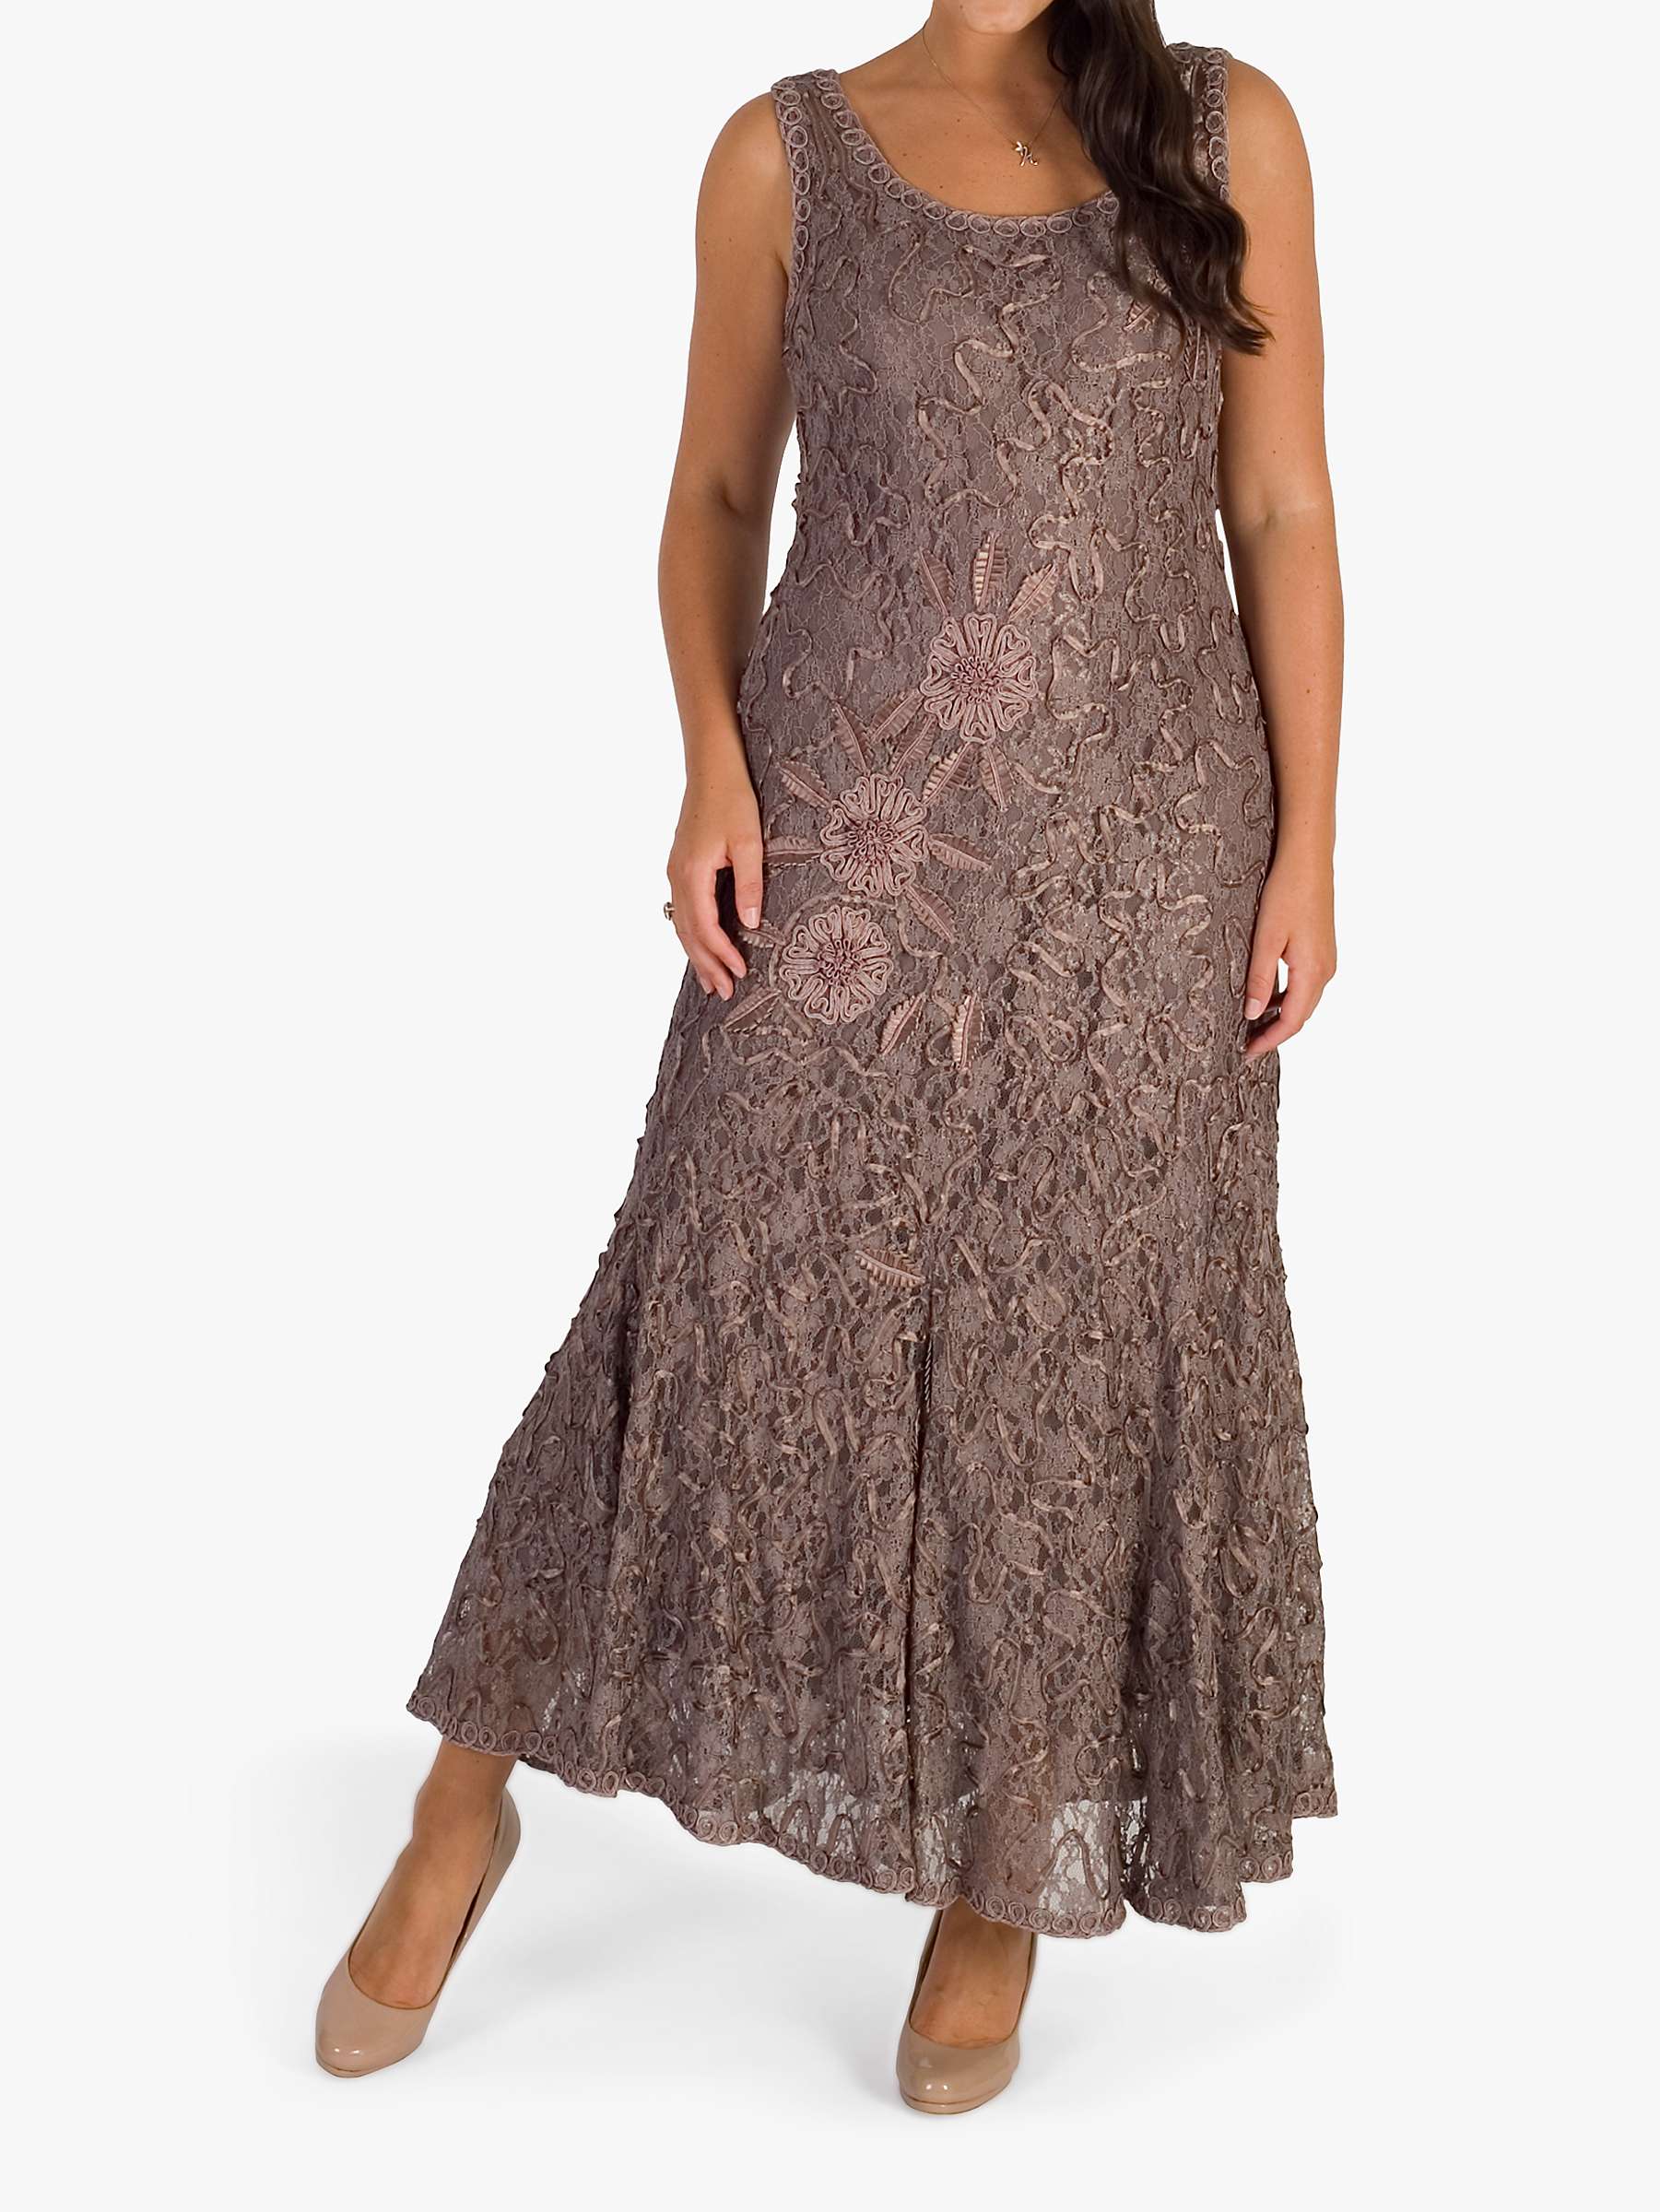 Buy Chesca Lace Cornelli Embroidered Dress Online at johnlewis.com